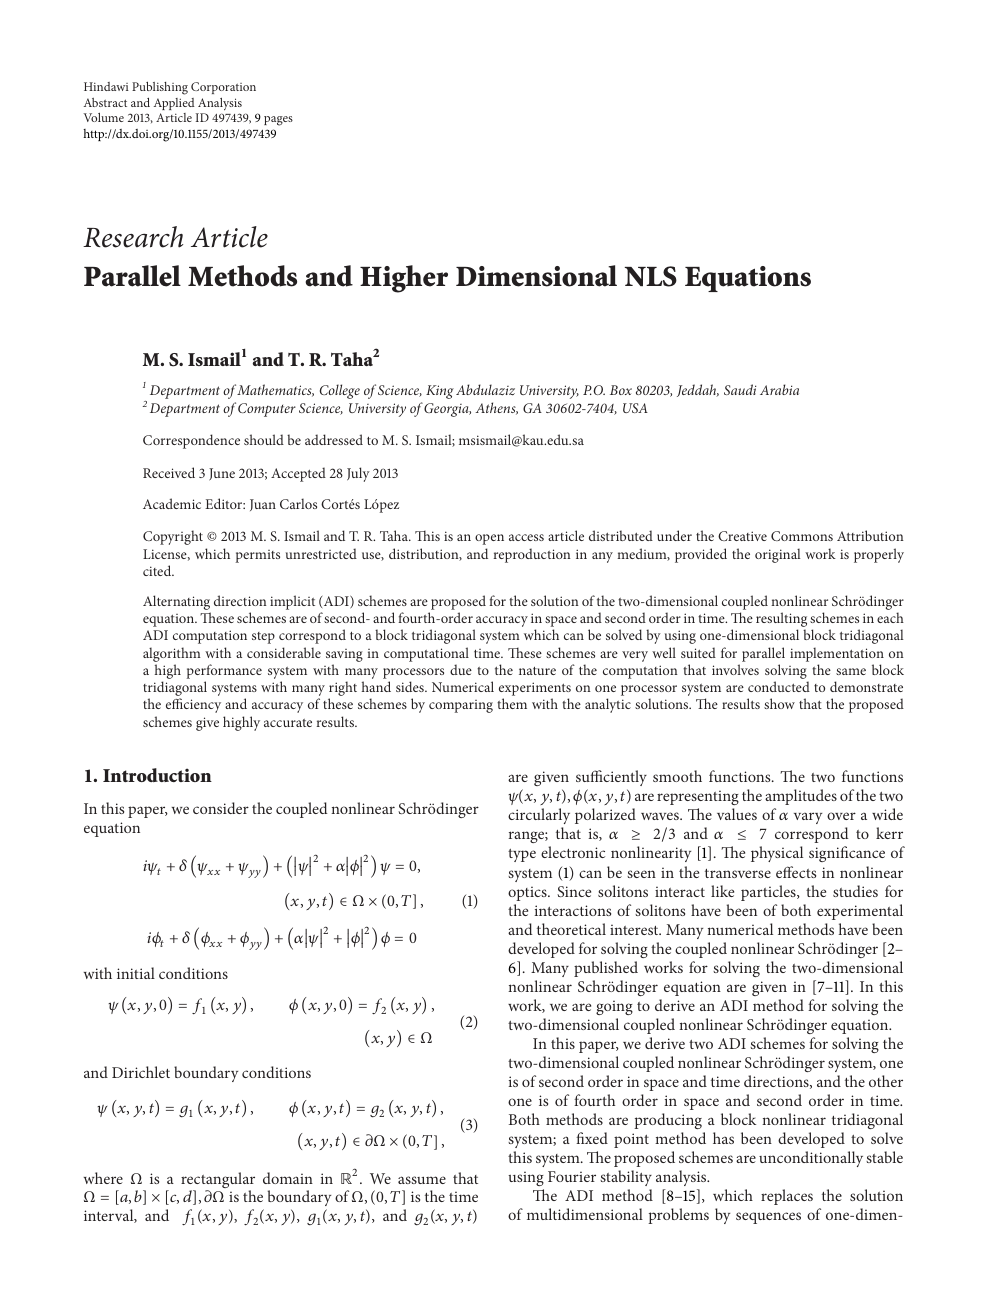 Parallel Methods And Higher Dimensional Nls Equations Topic Of Research Paper In Mathematics Download Scholarly Article Pdf And Read For Free On Cyberleninka Open Science Hub